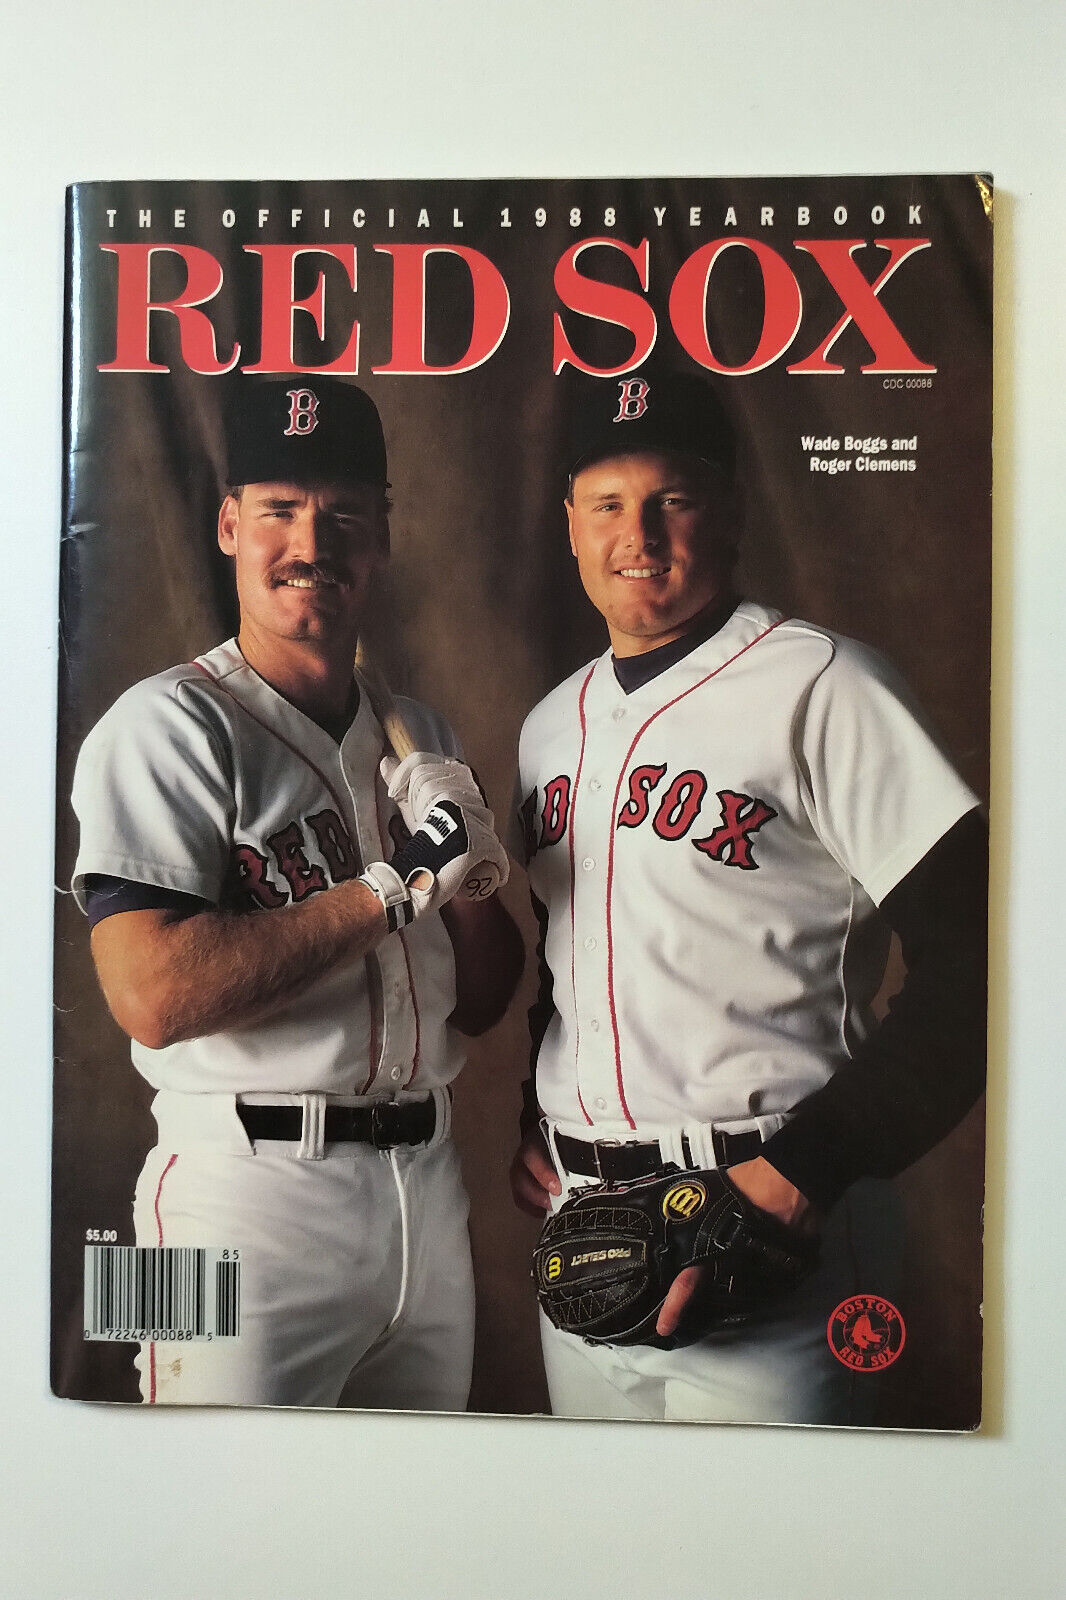 1988 Max 56% OFF Boston Red Sox Official Wade Cheap mail order shopping Yearbook Boggs Roge Magazine